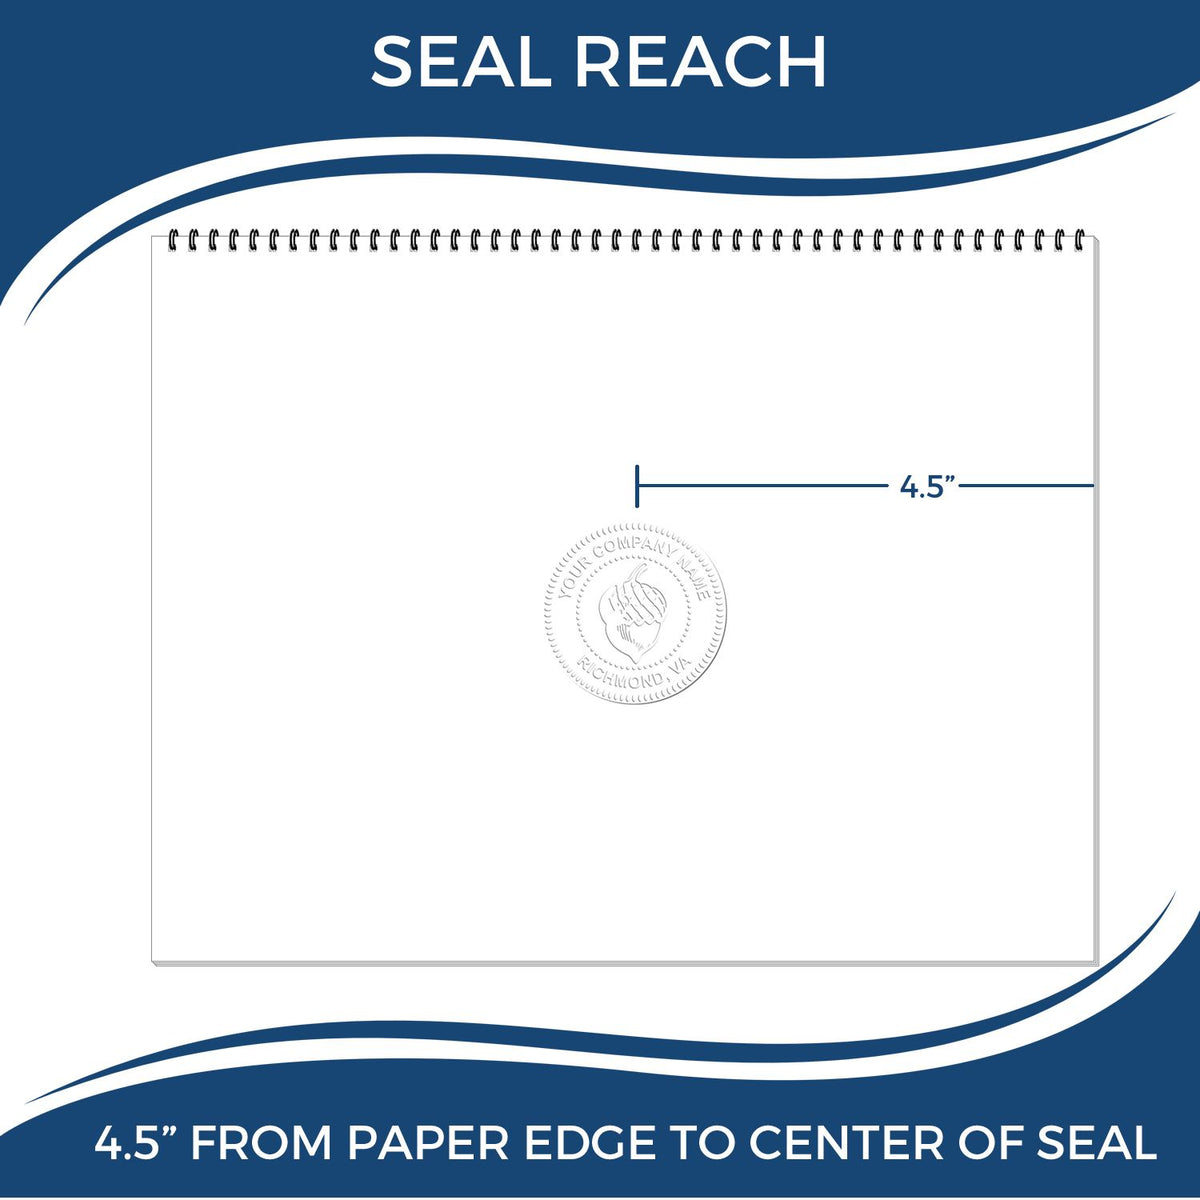 An infographic showing the seal reach which is represented by a ruler and a miniature seal image of the State of Maryland Extended Long Reach Geologist Seal